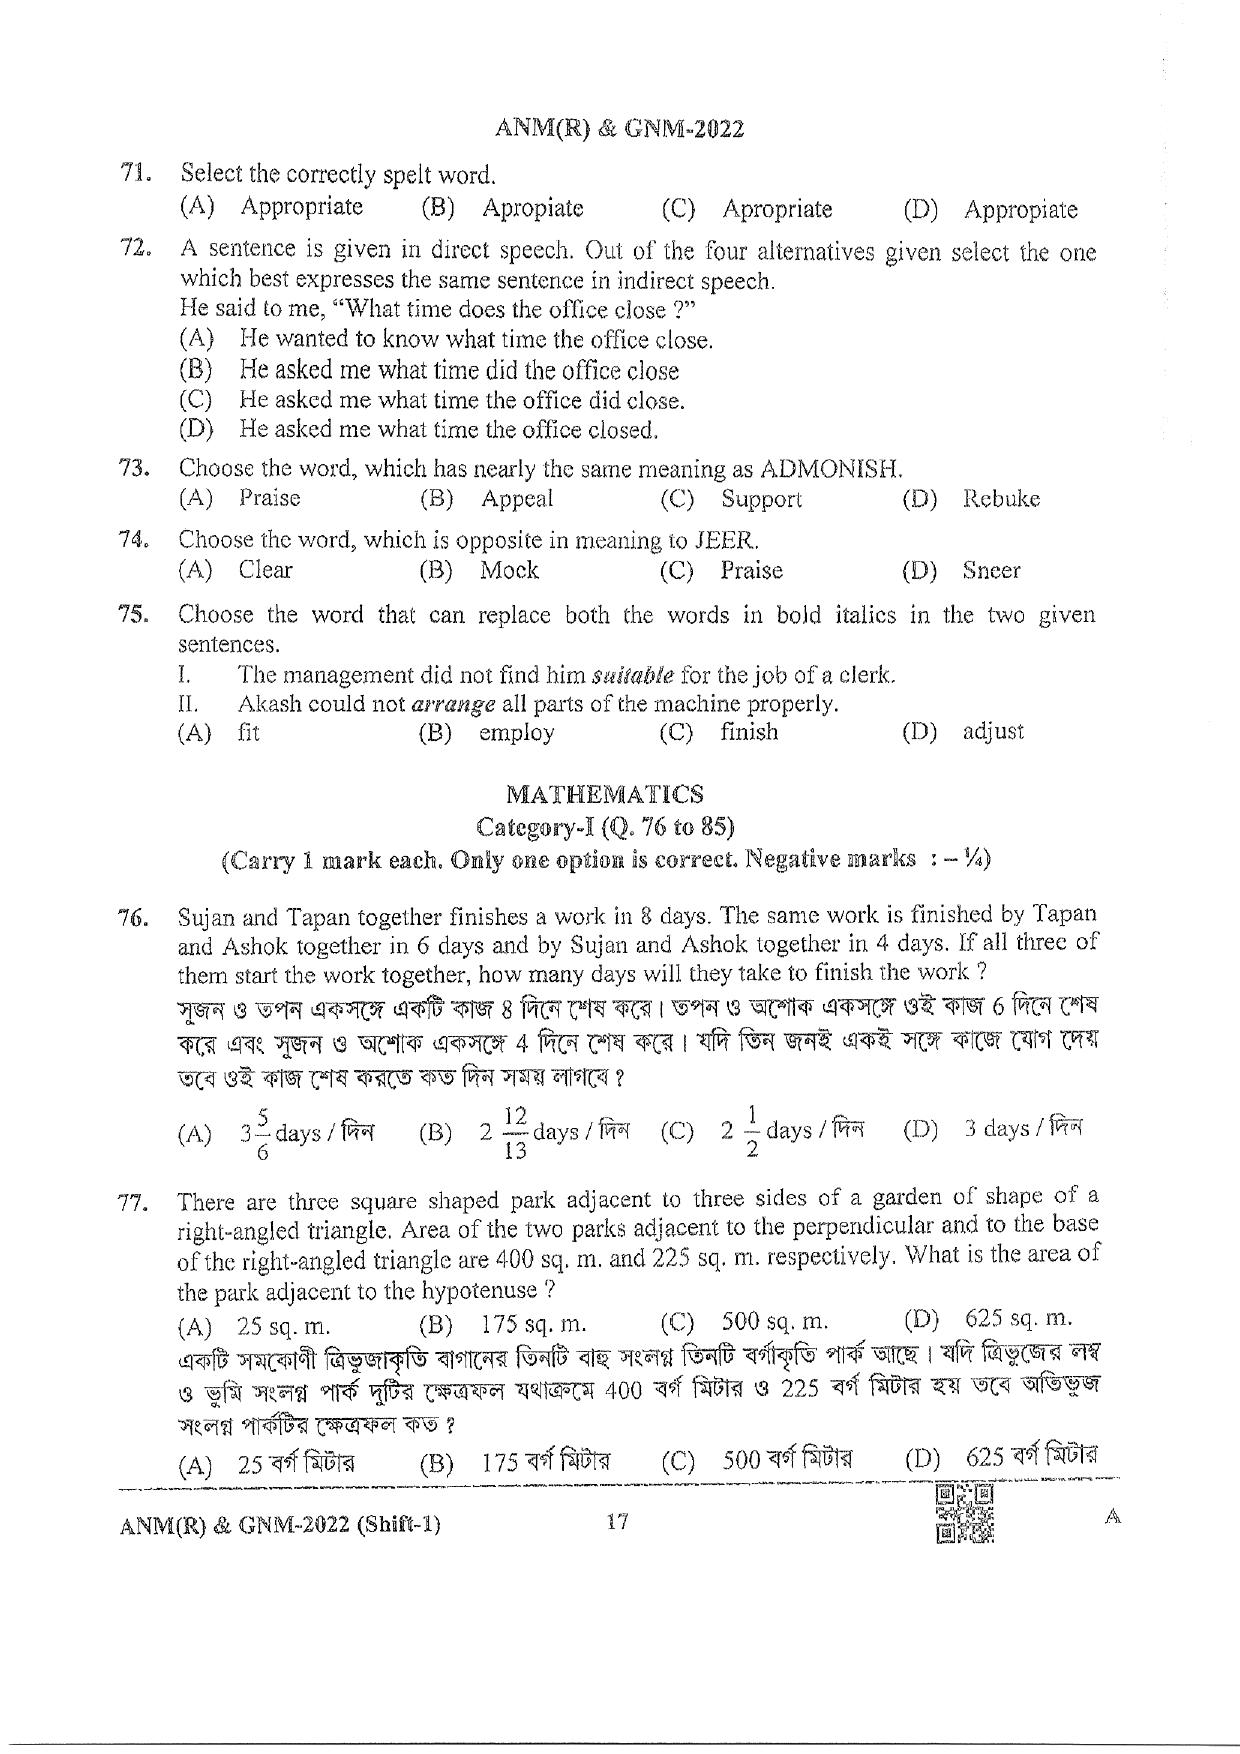 WB ANM GNM 2022 Question Paper - Page 17